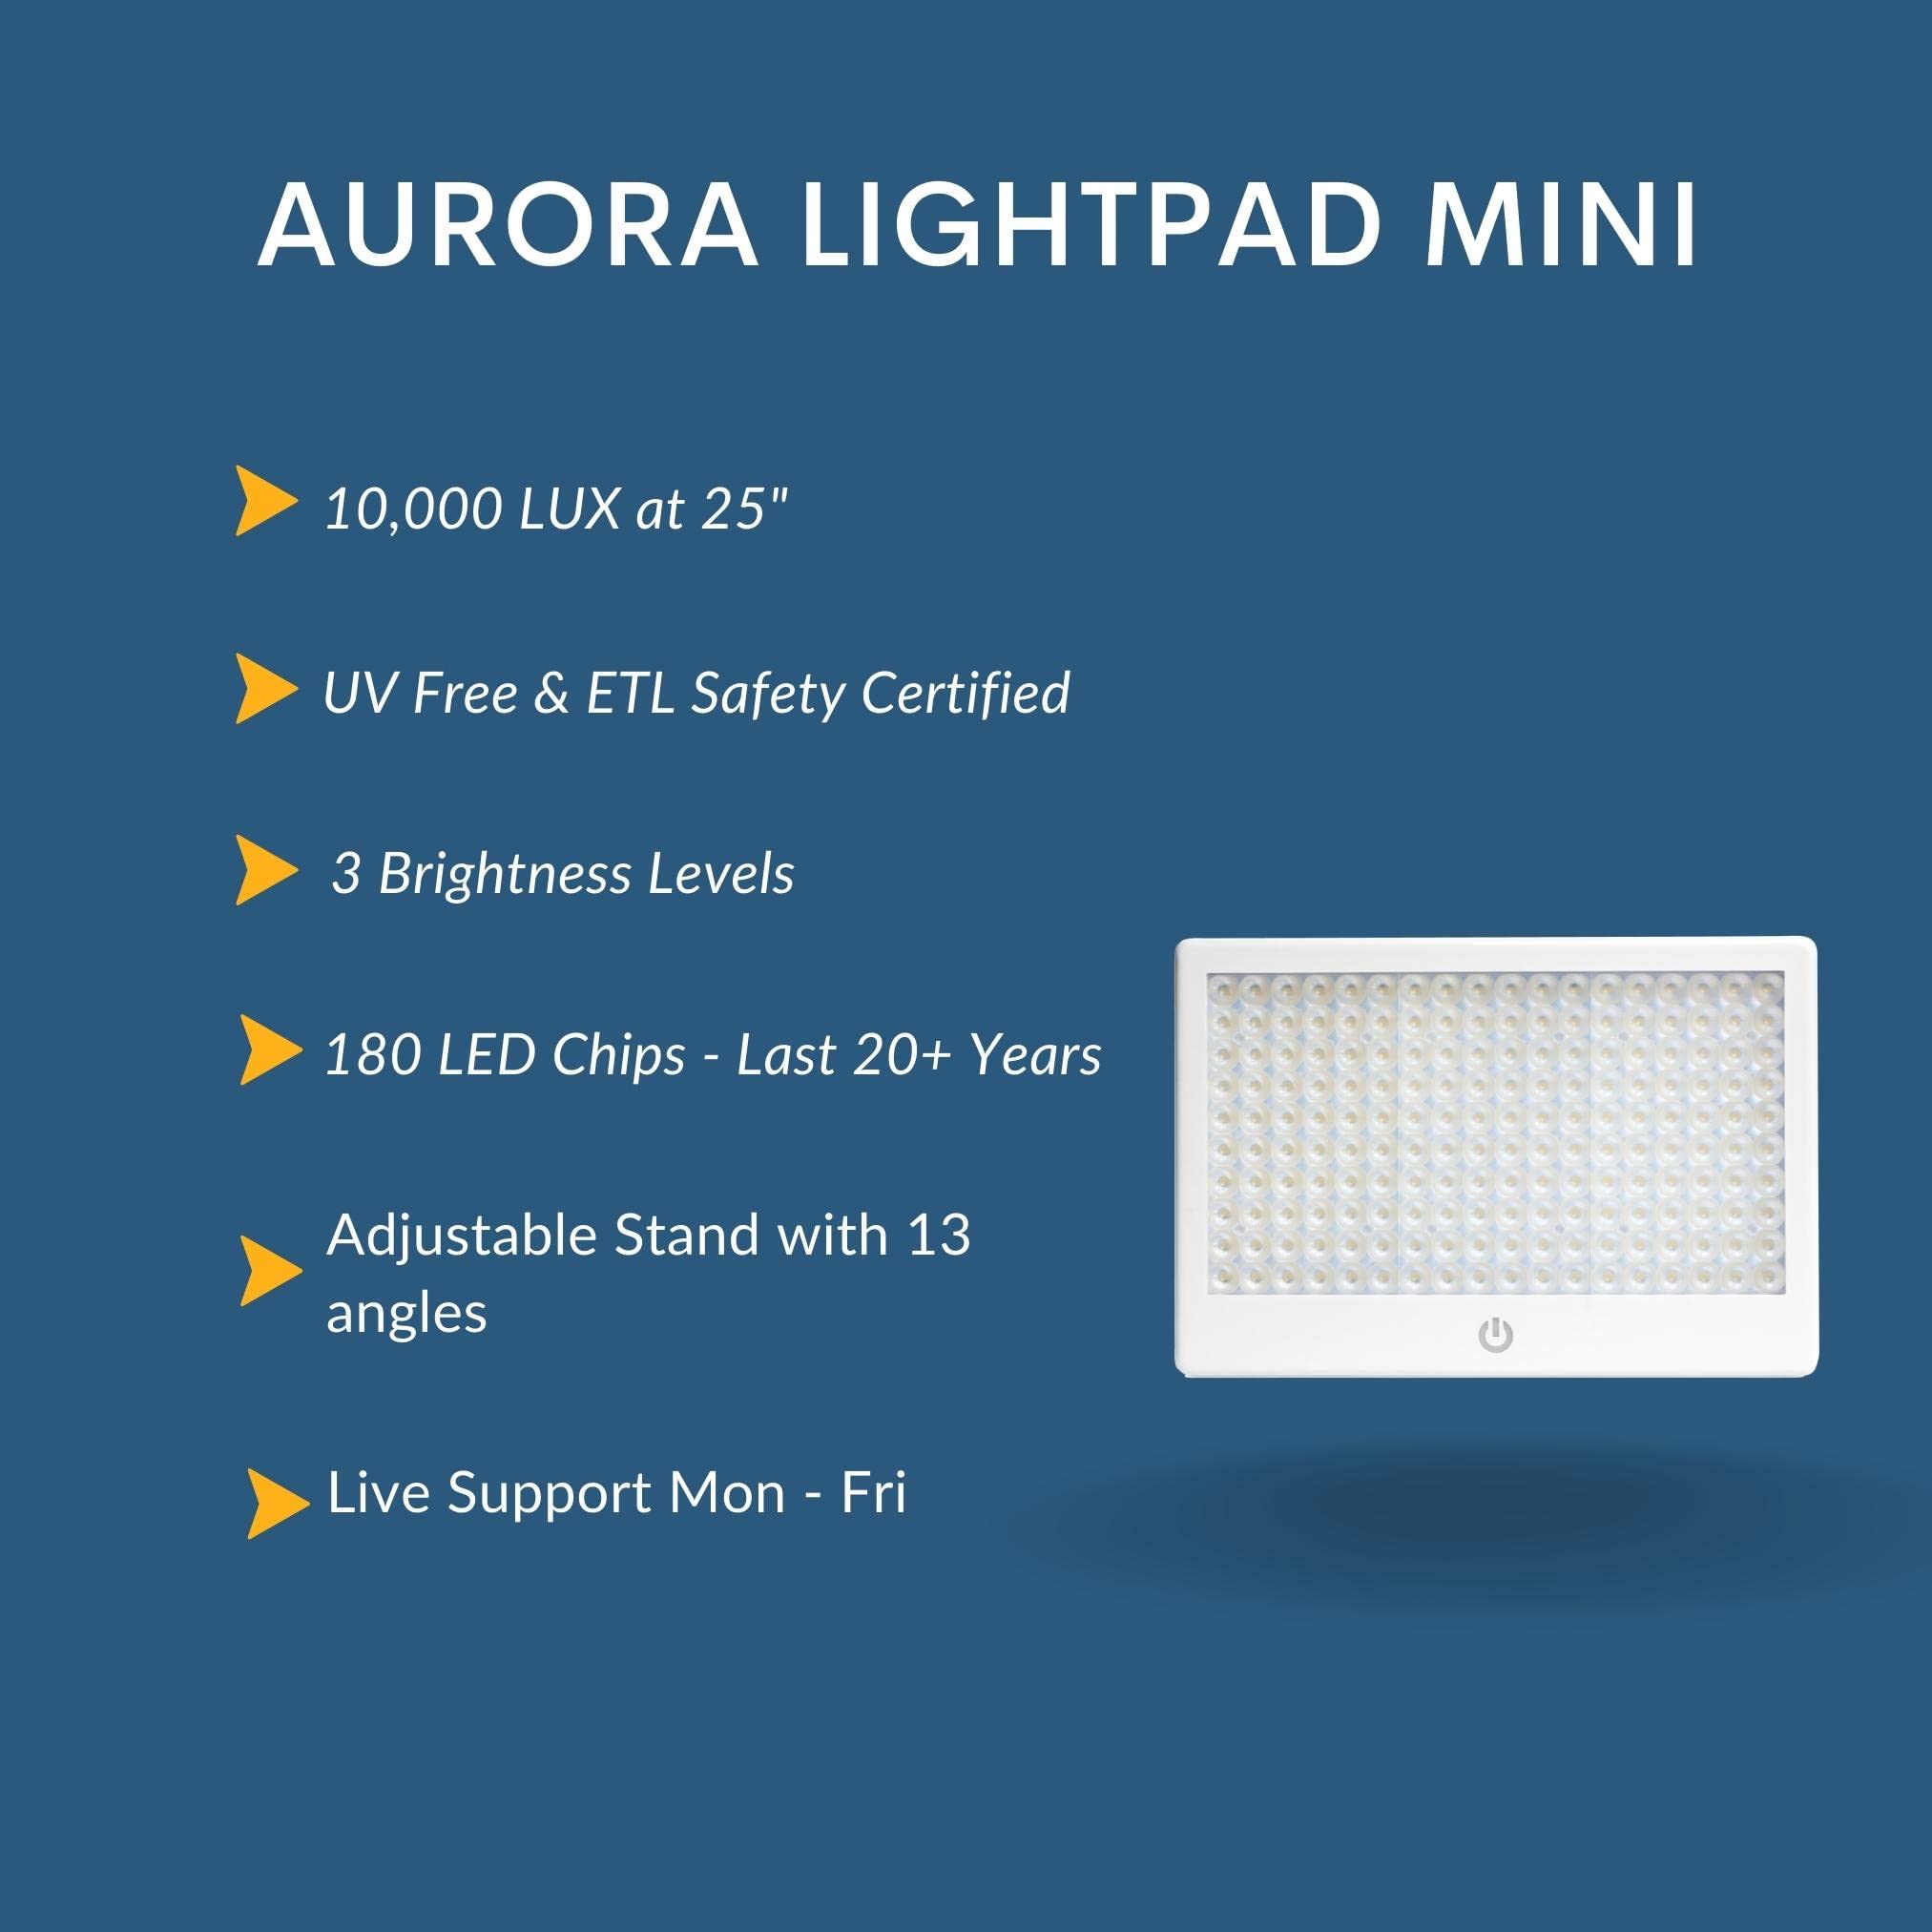 Alaska Northern Lights Aurora LightPad - UV Free 10,000 LUX LED Light Therapy Lamp at 25 Inches, Adjustable Brightness, 180 LED Chips, Lightweight, Portable, ETL Safety Certified